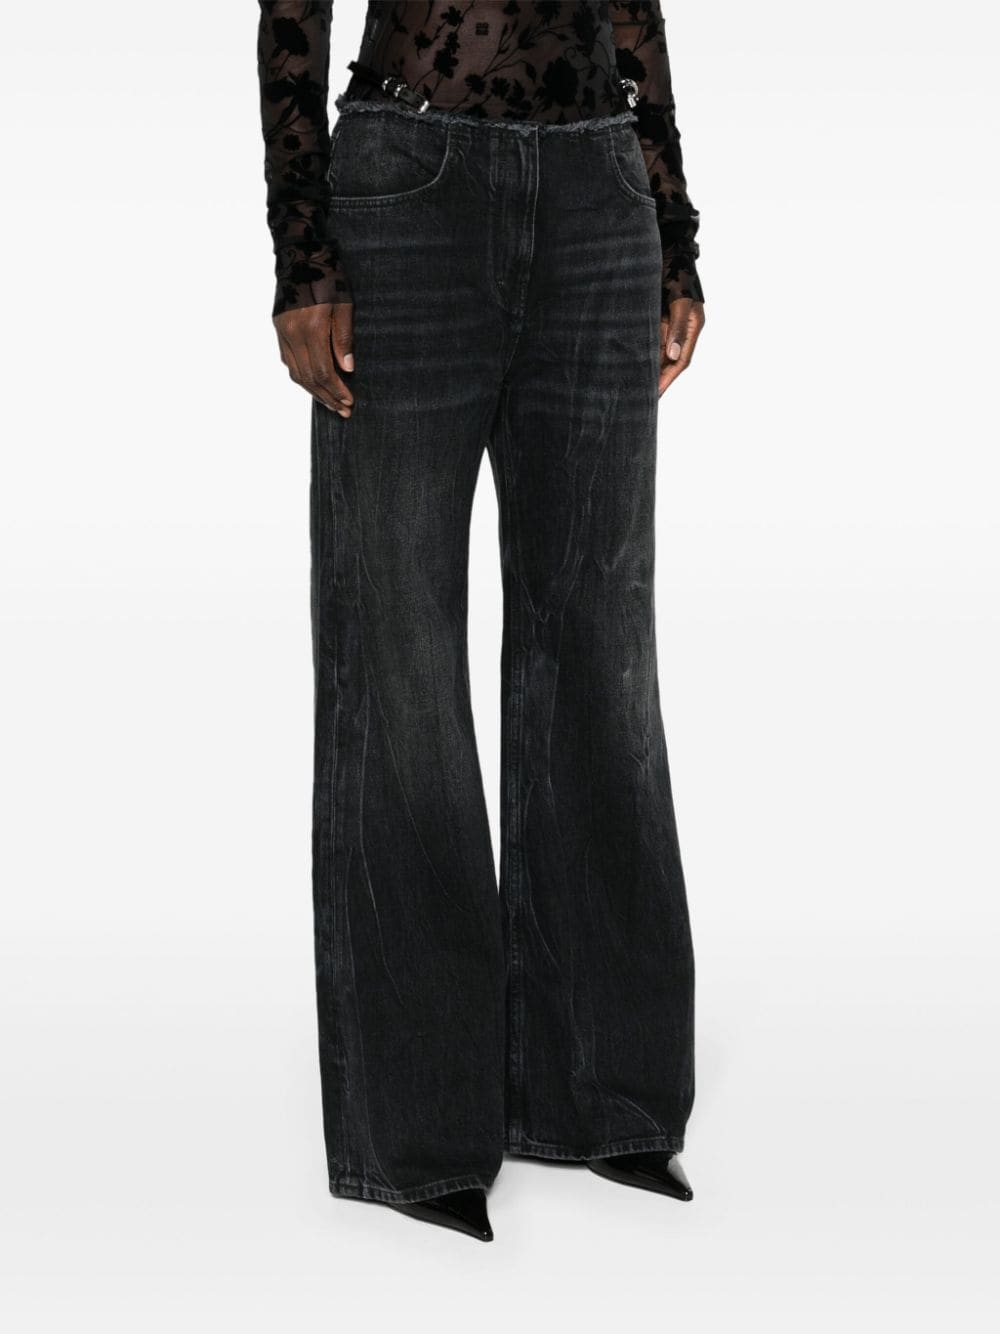 Givenchy Jeans Black